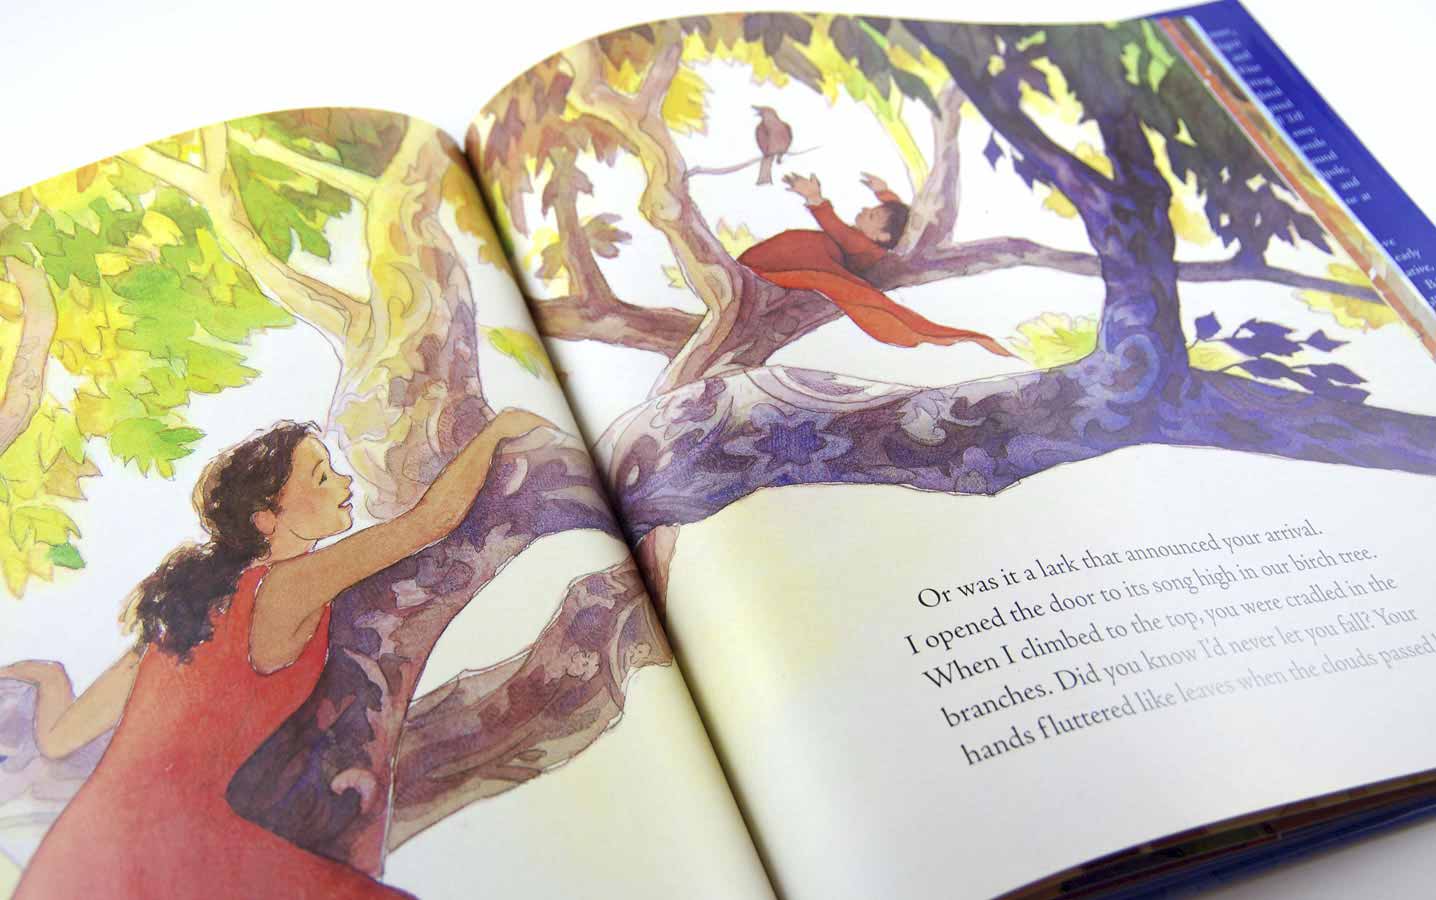 Photograph of The Story I'll Tell book, open to a page showing a mother climbing up a birch tree toward a baby and a small bird.